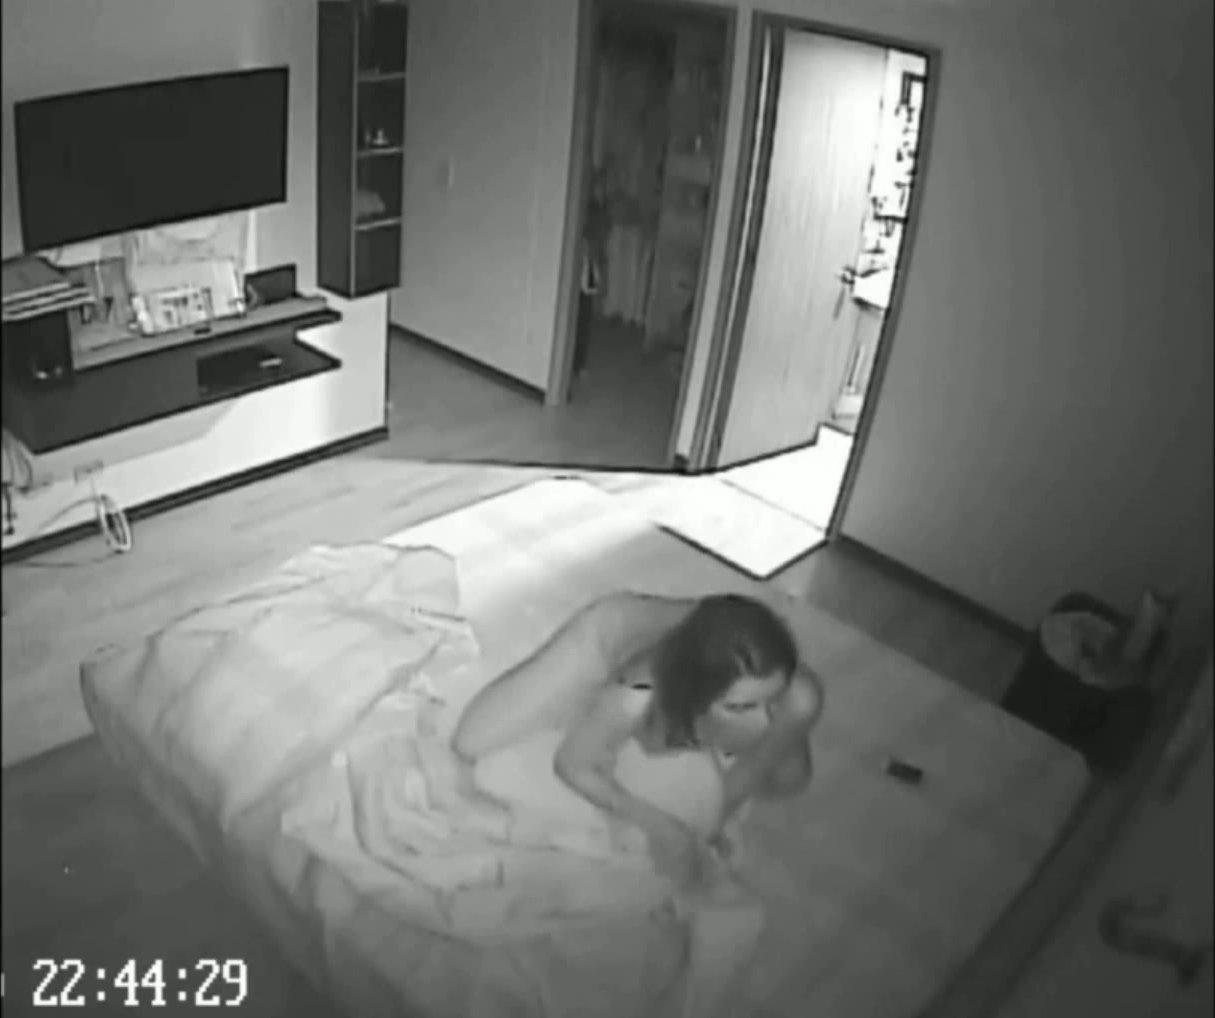 Straight Voyeur 2 hacked Ip cam pillow humping image